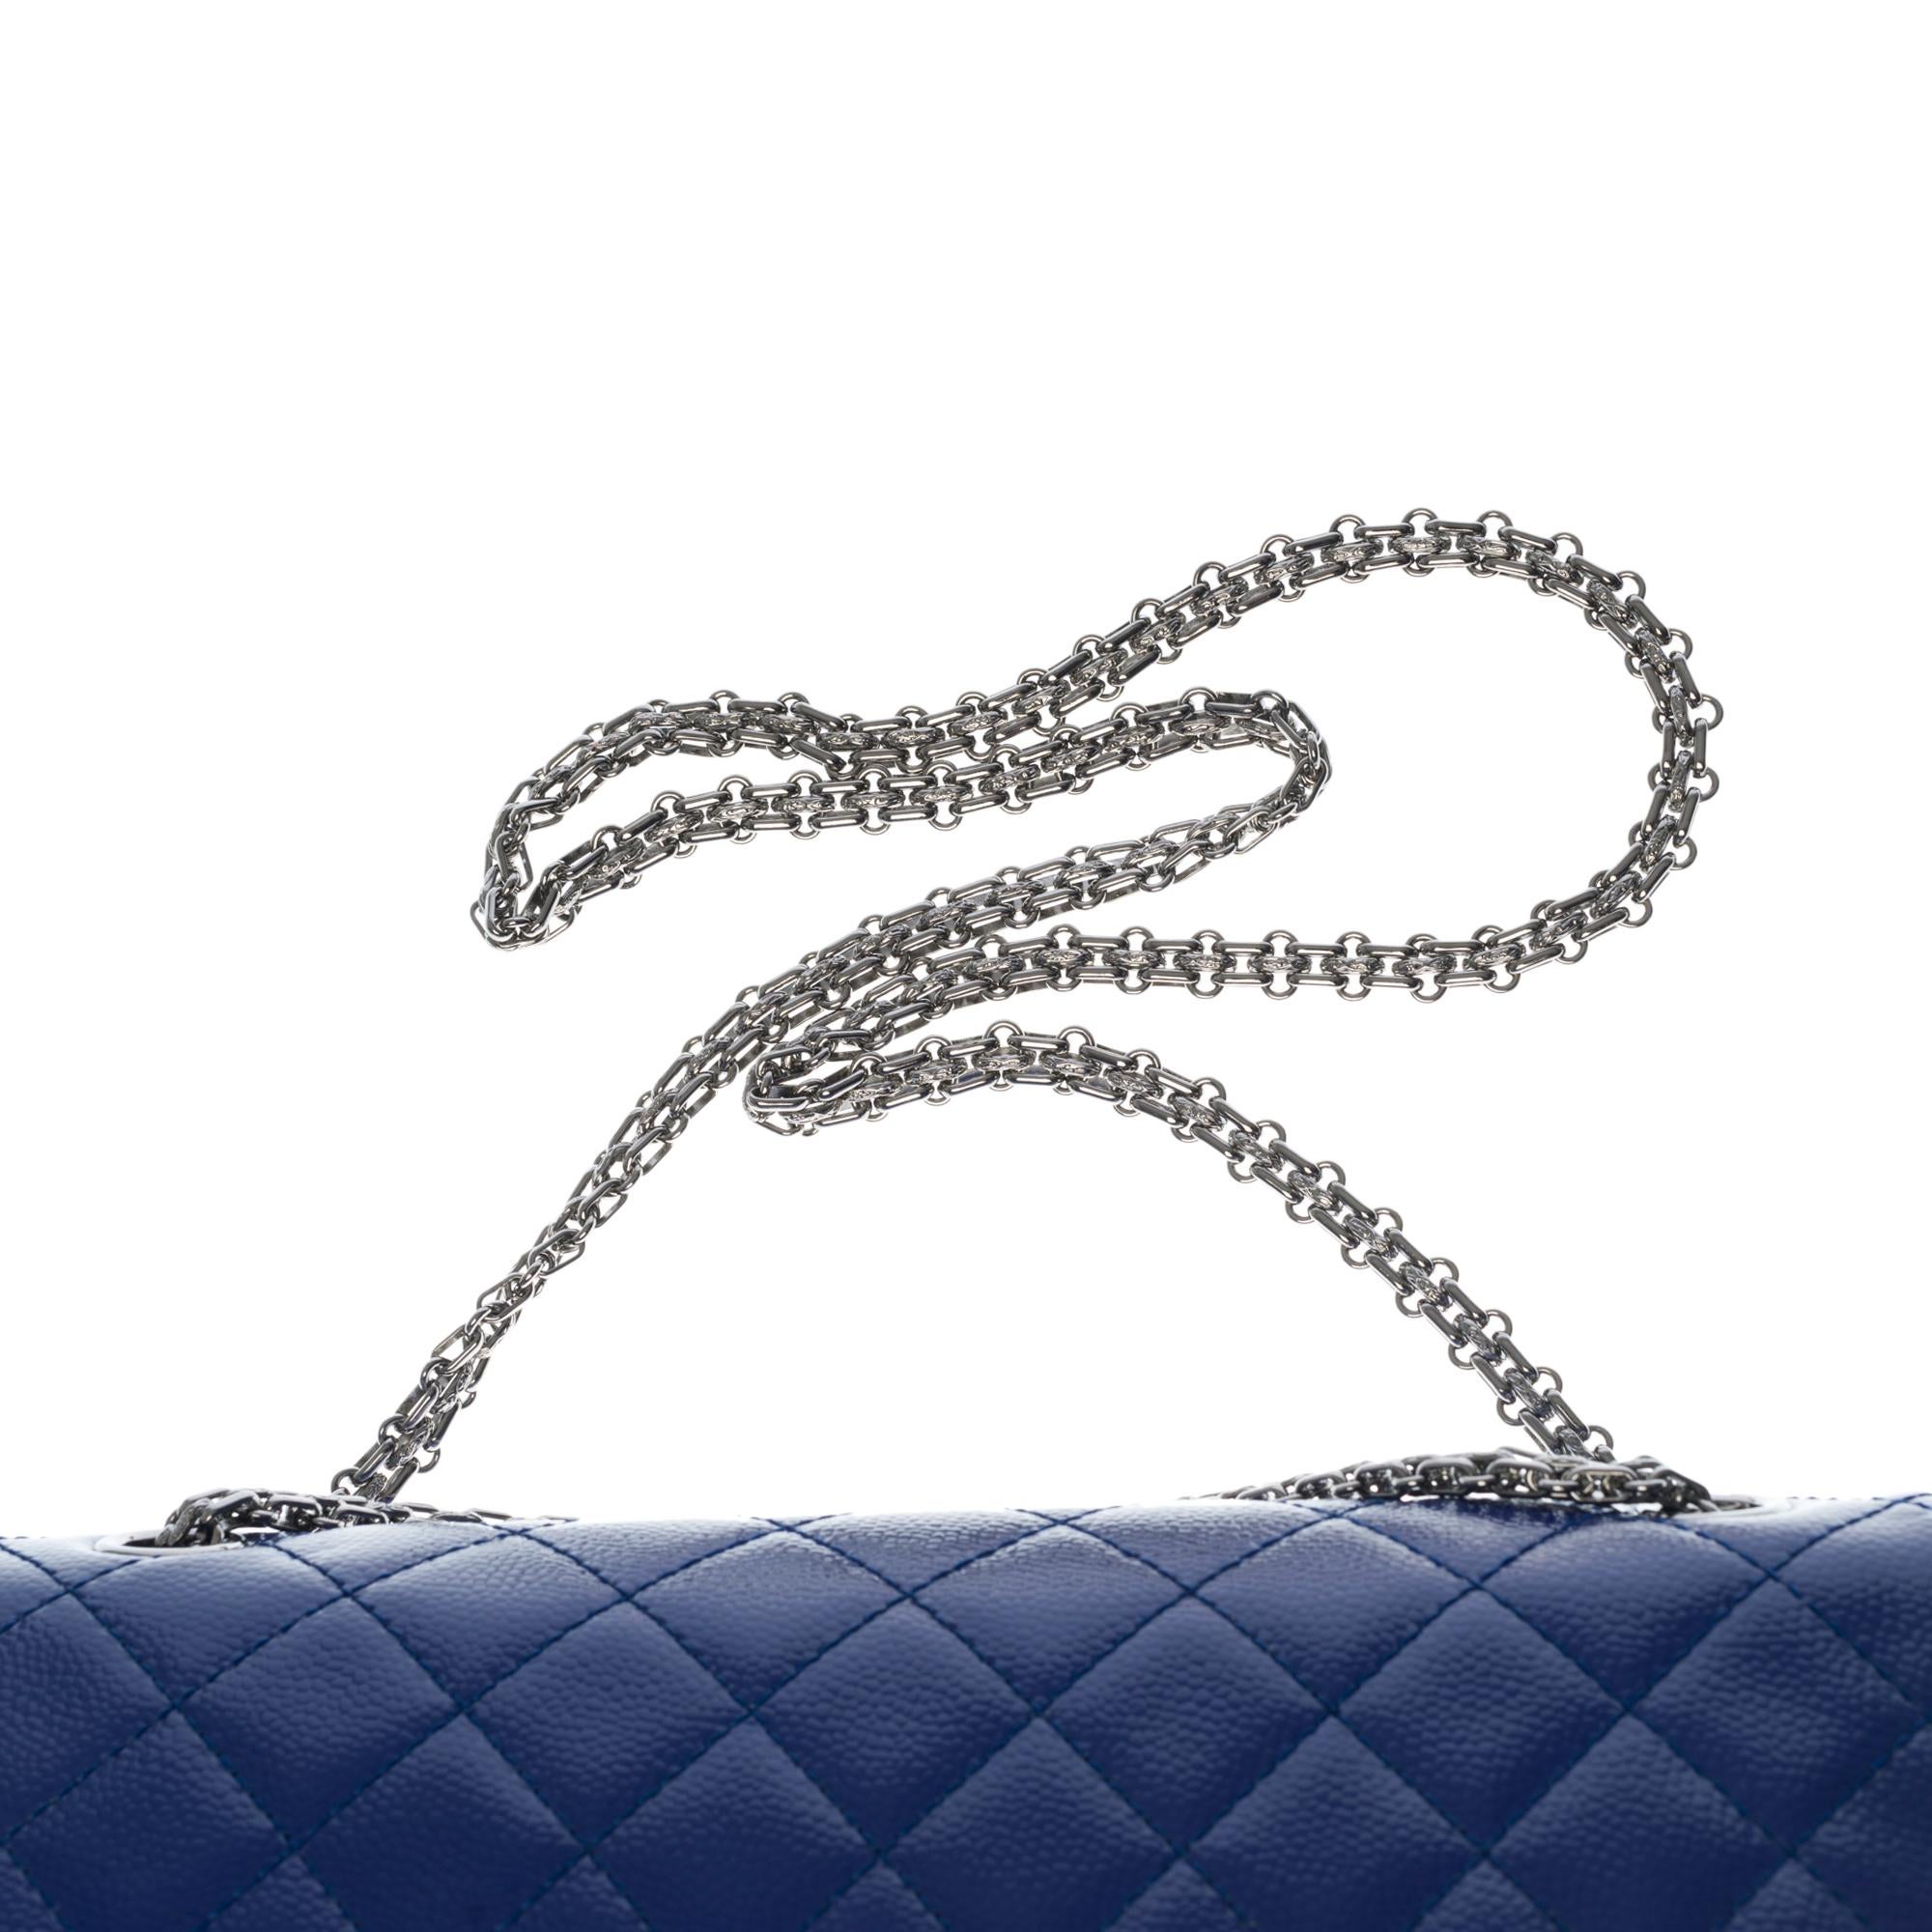 Women's Chanel Classic 2.55 shoulder bag in electric blue quilted patent leather, SHW